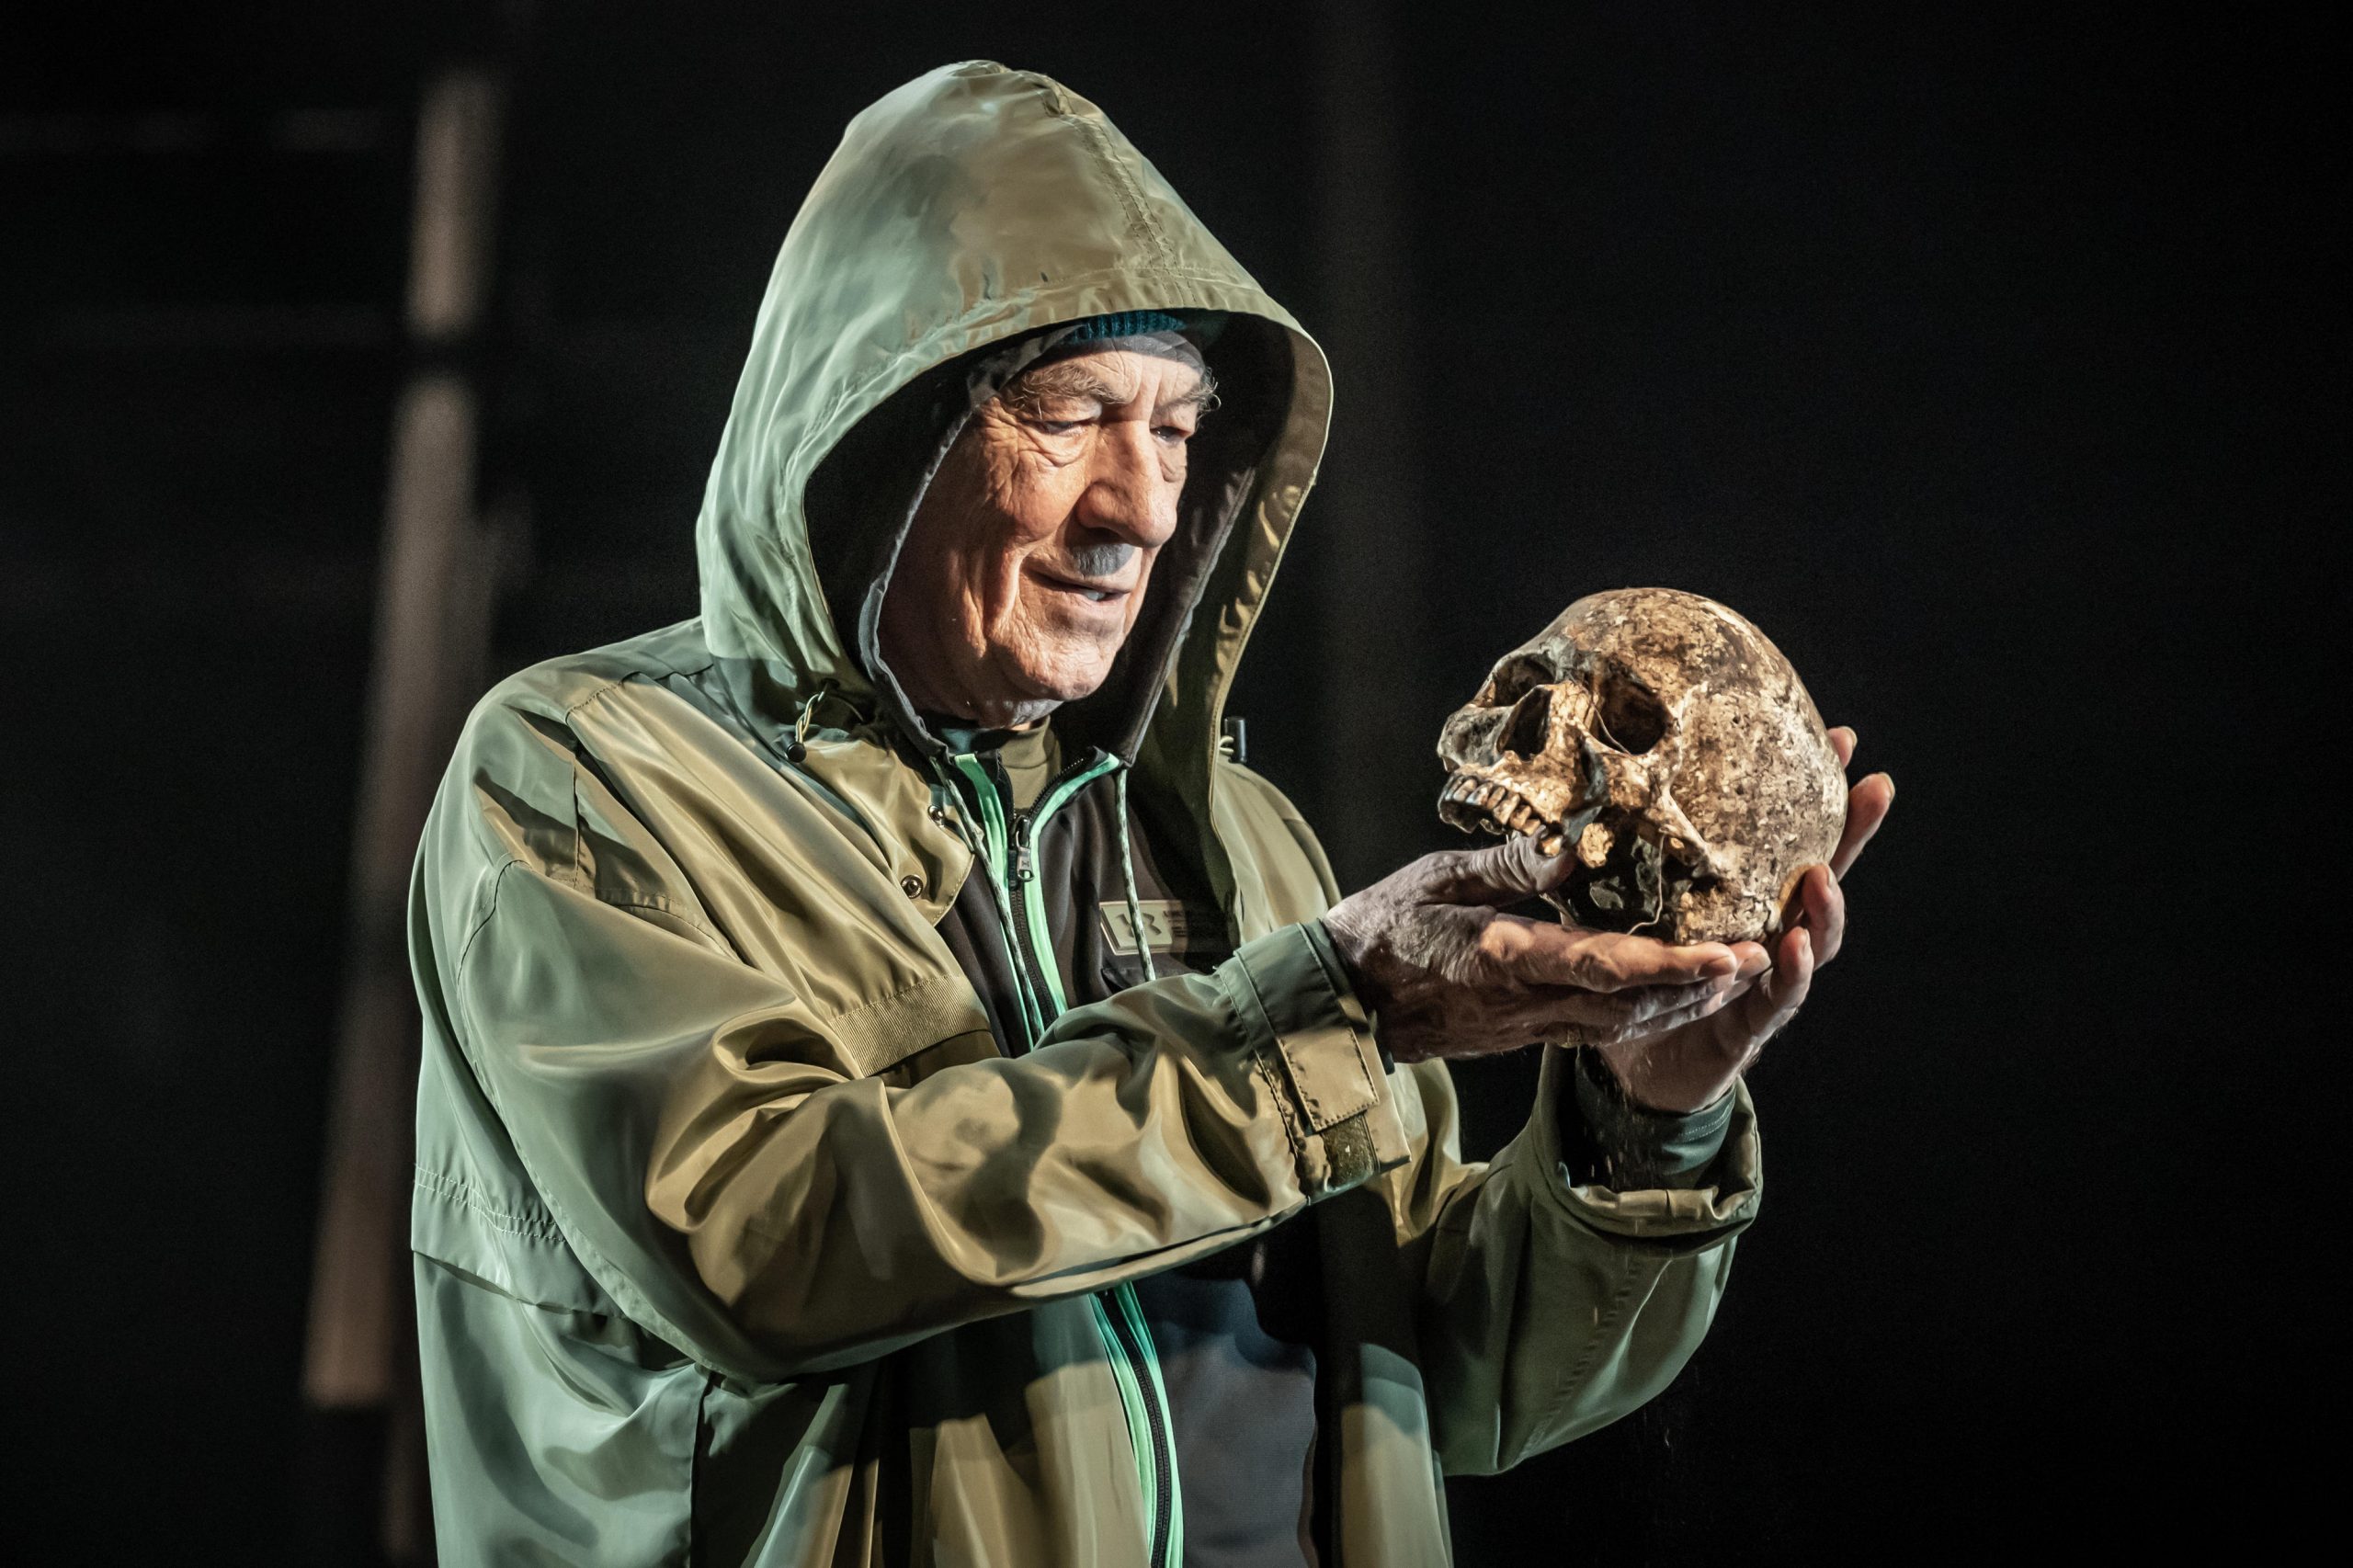 The great Ian McKellen contemplates mortality (and Yorick’s skull) in his age-blind Hamlet Photo: Theatre Royal, Windsor